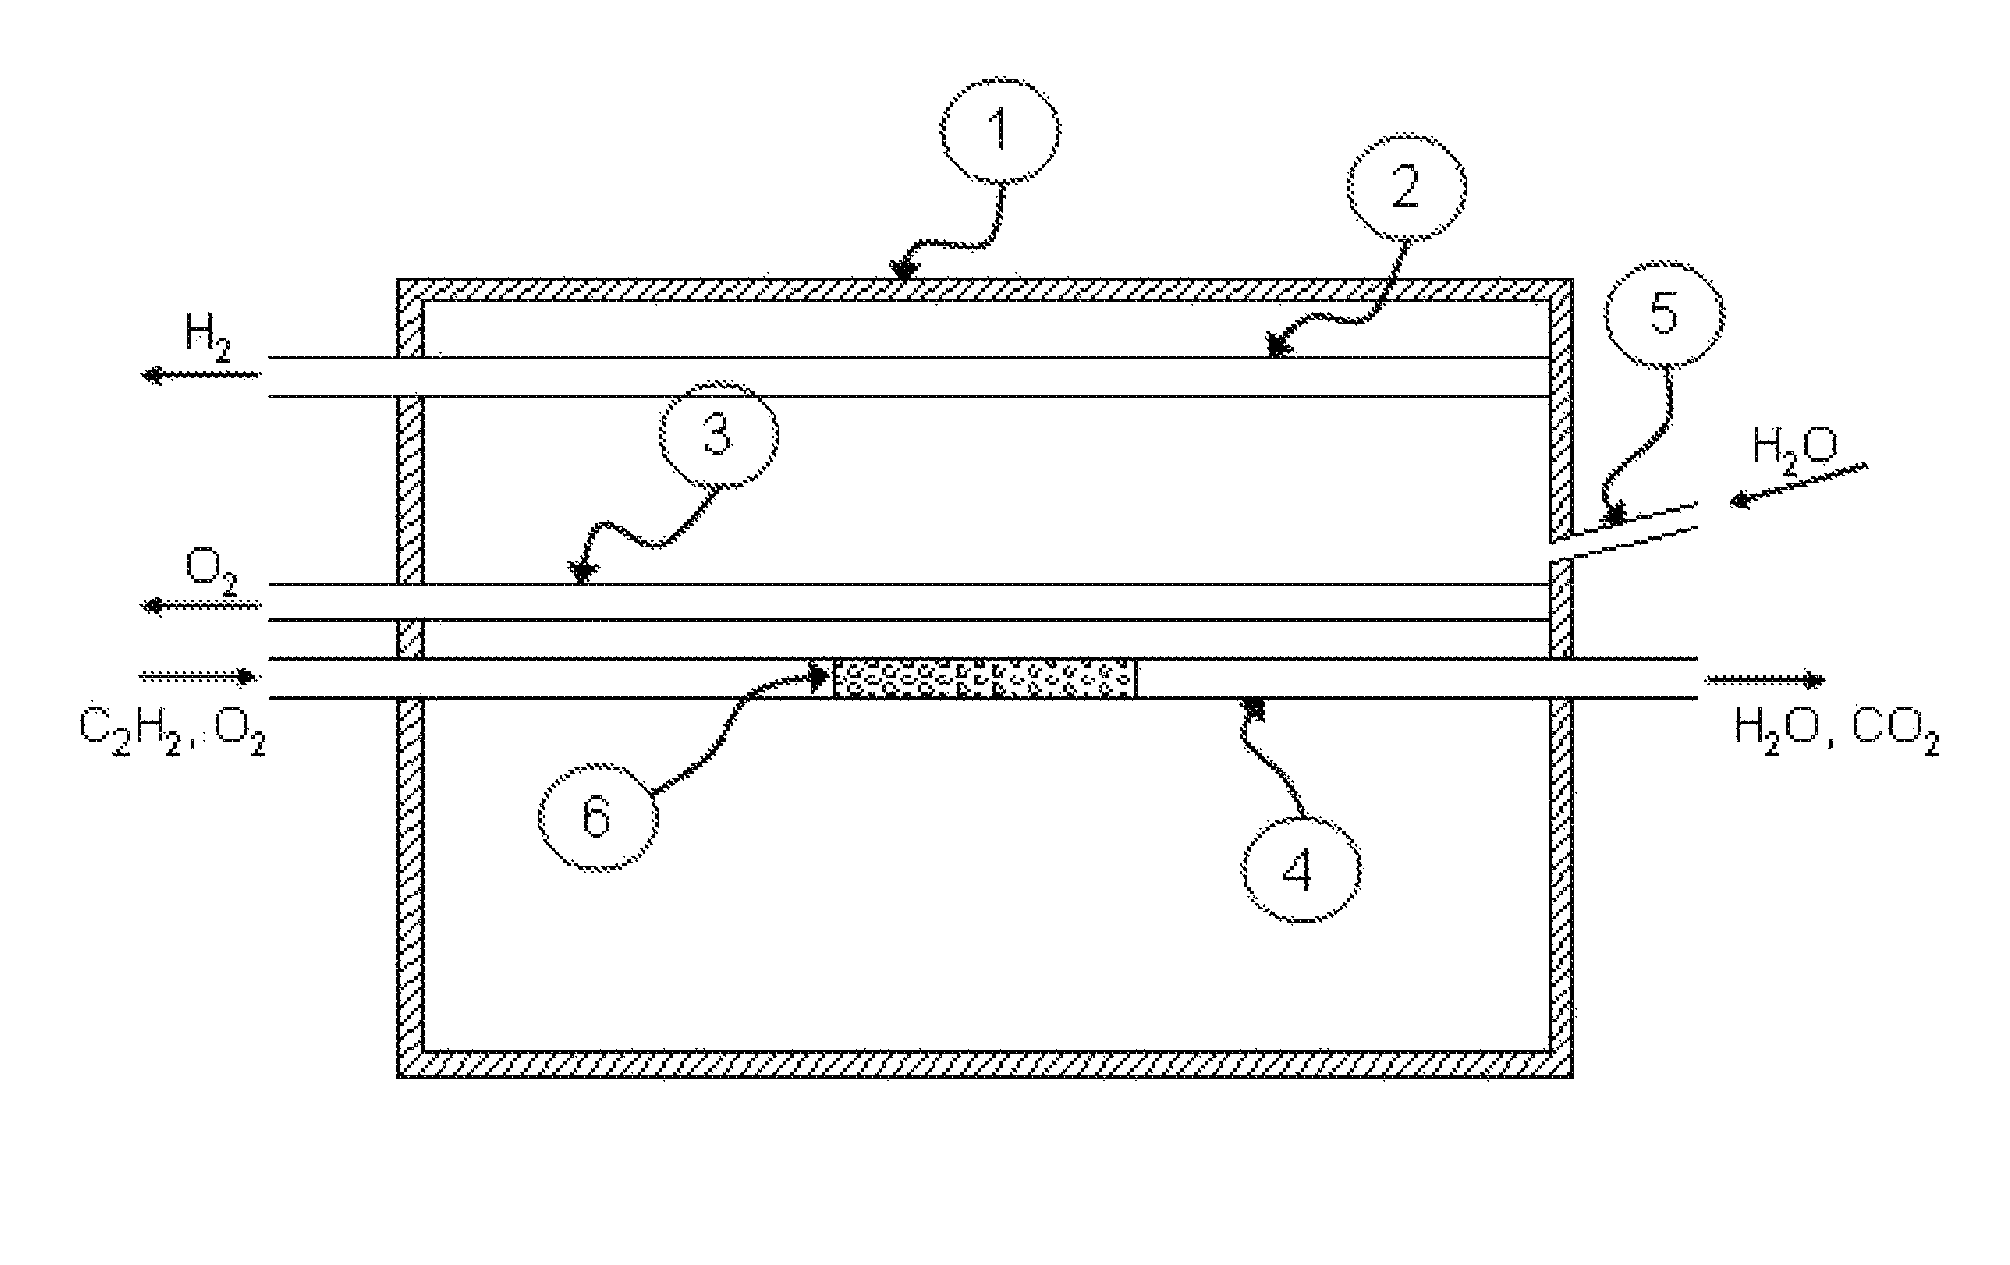 Reactor for simultaneous separation of hydrogen and oxygen from water